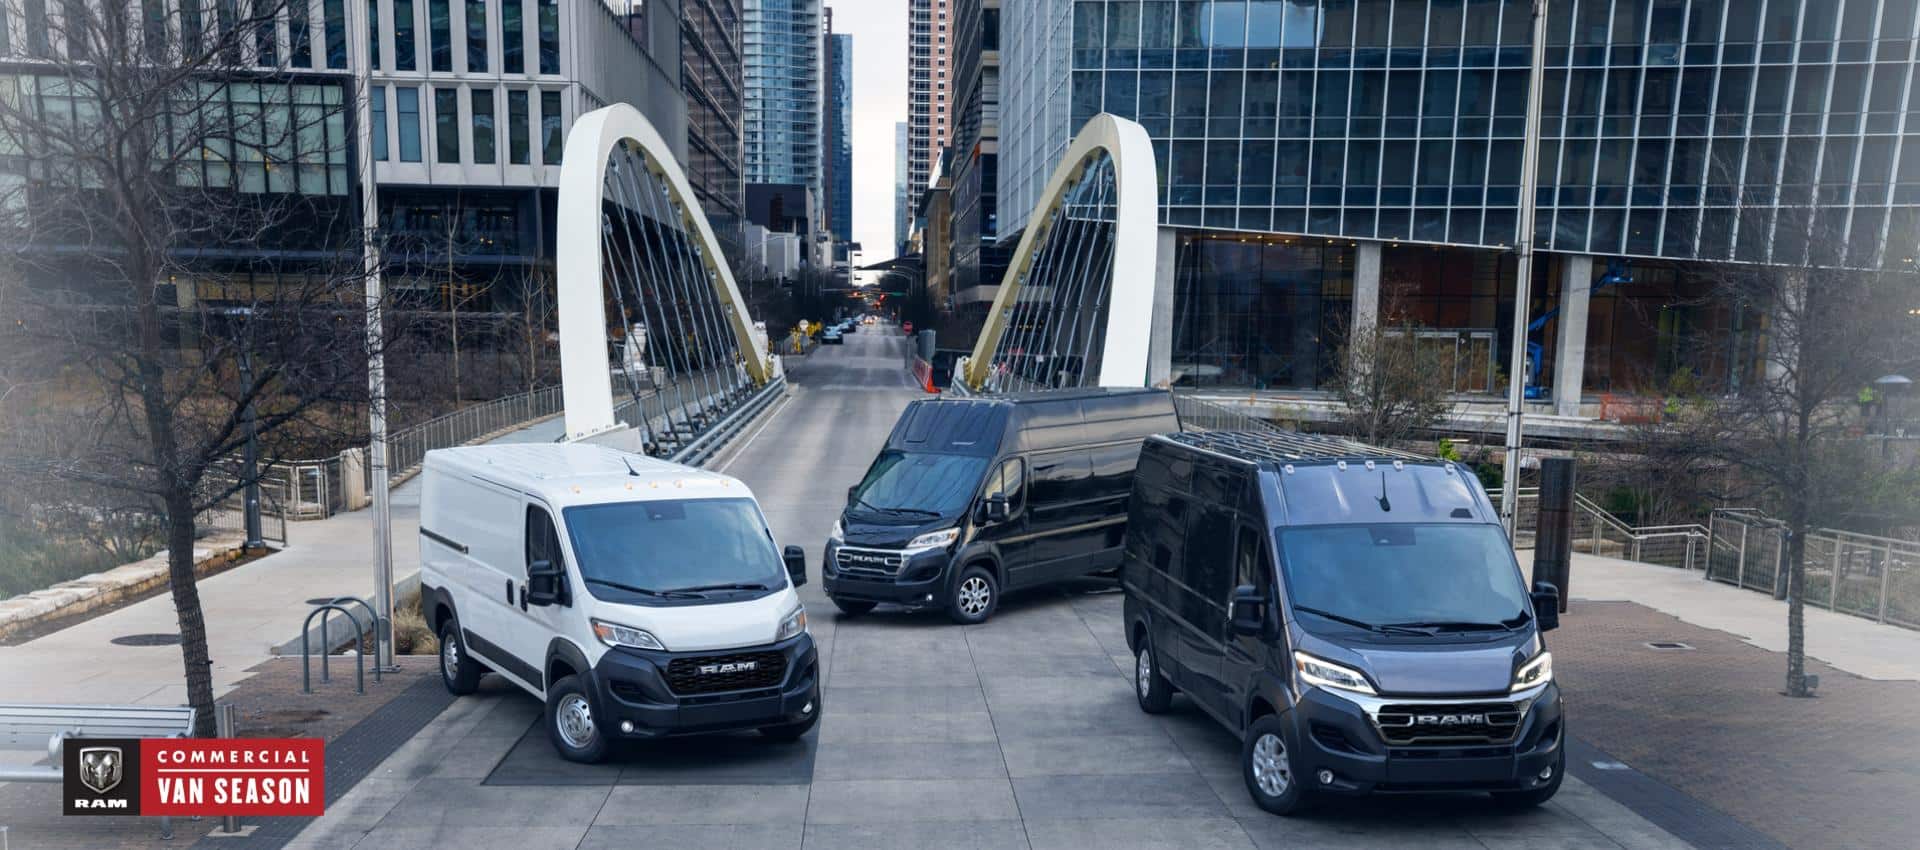 Three 2024 Ram ProMaster models, from left to right: a white Ram ProMaster 1500 Tradesman Standard Roof Cargo Van, a black Ram ProMaster 3500 SLT+ Super High Roof Cargo Van and a black Ram ProMaster 3500 SLT High Roof Cargo Van parked just beyond a bridge in the center of a busy large city. Ram Commercial Van Season.